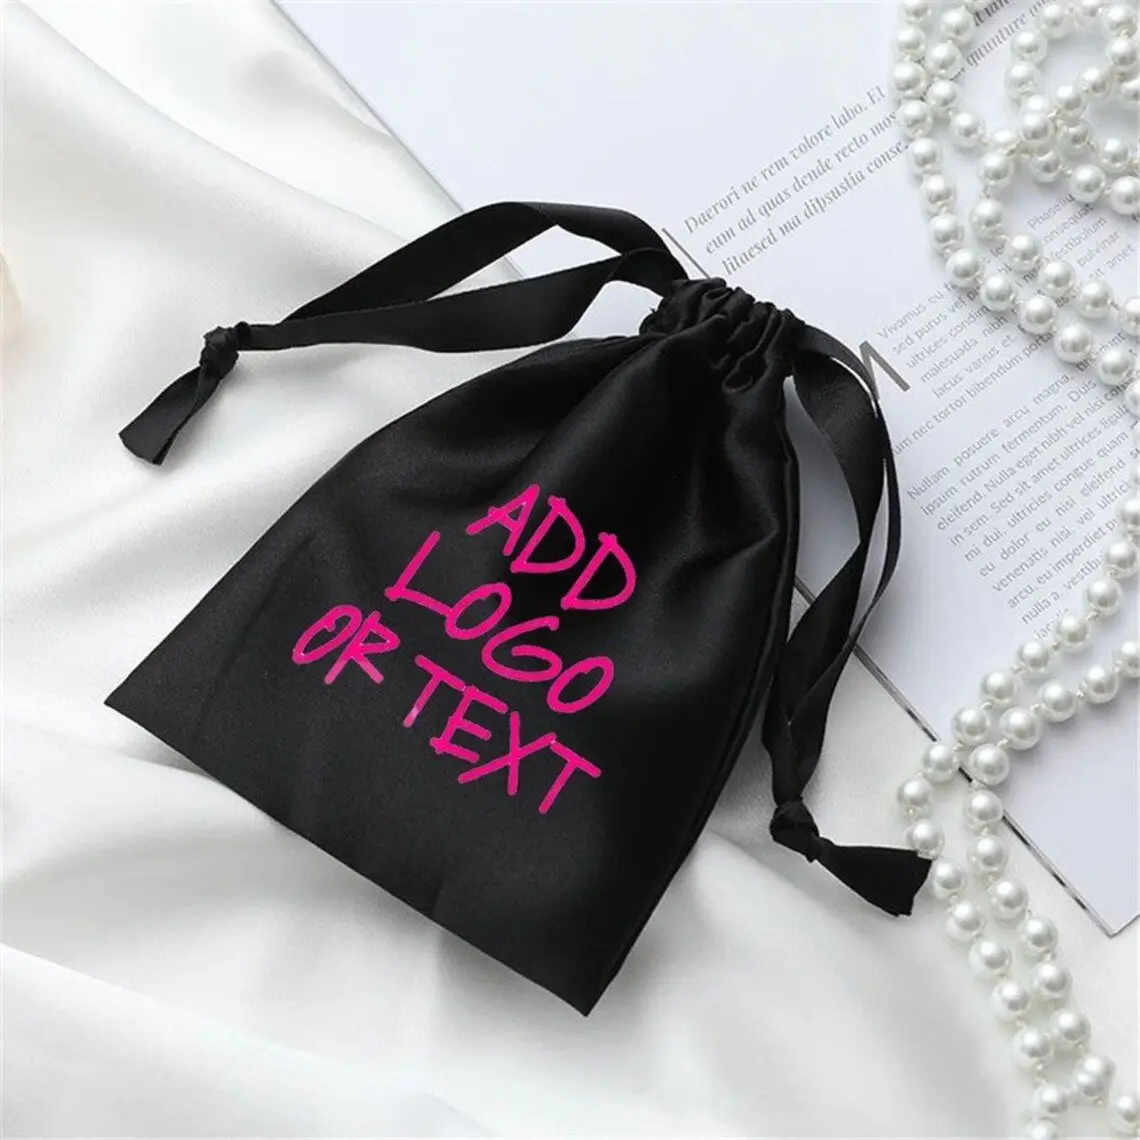 100pcs printable logo colored satin pockets silk dustproof jewelry packaging bags black drawstring pouch bags